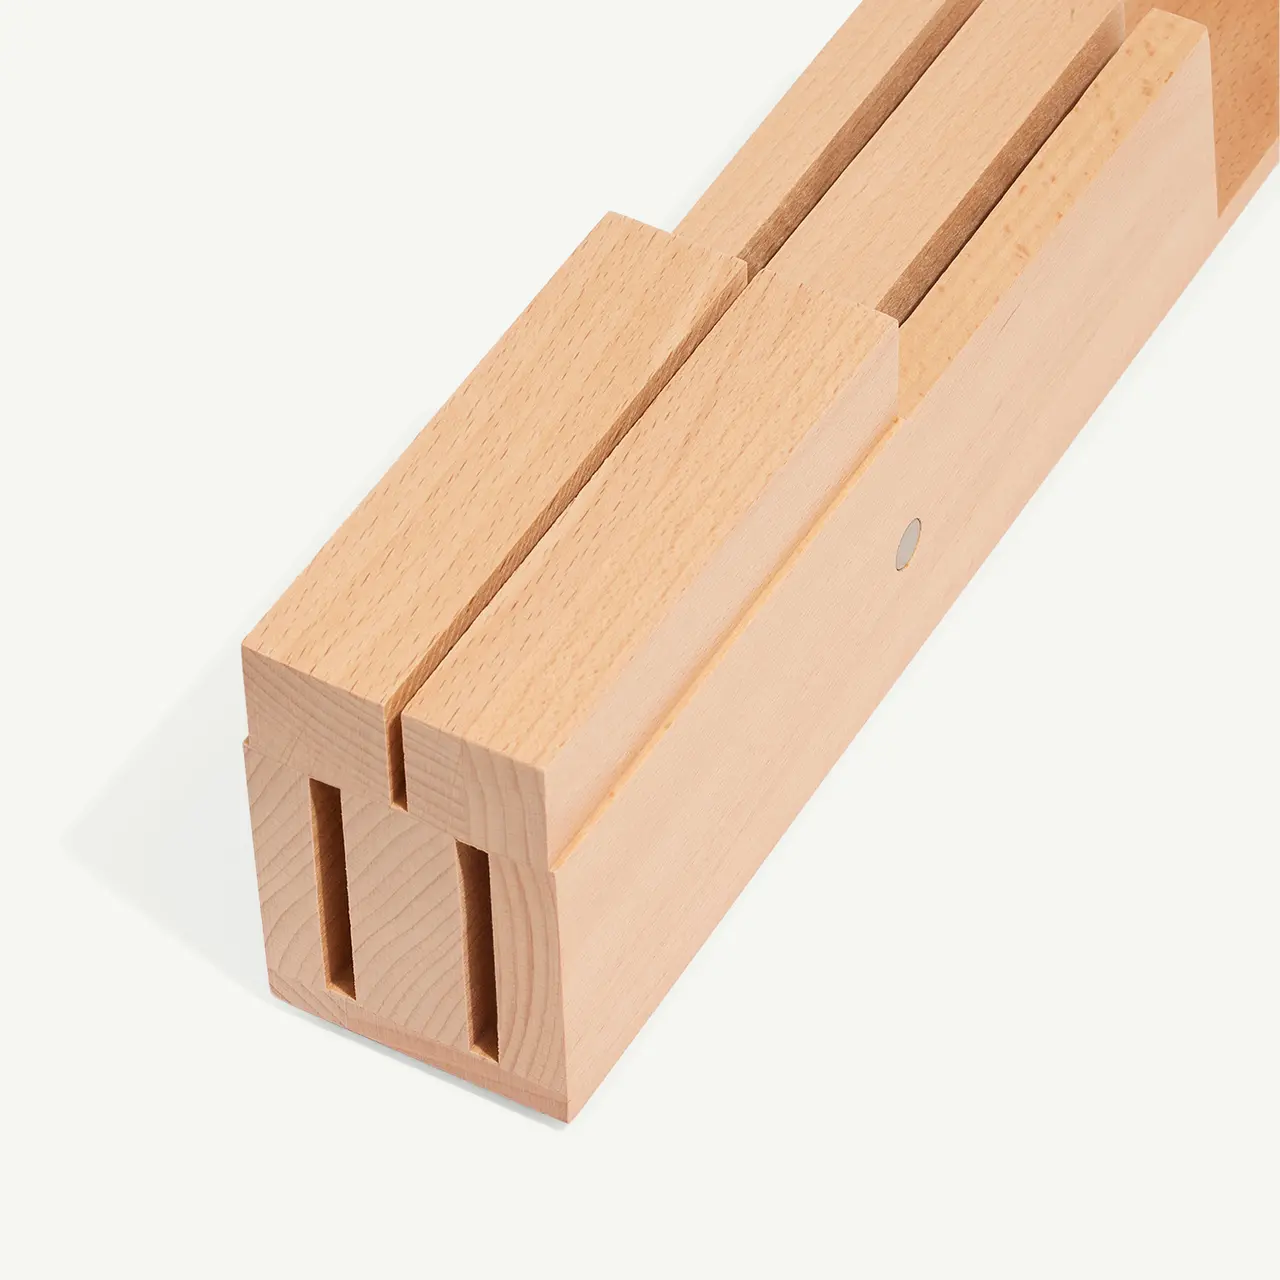 A wooden clothespin is isolated against a white background, showcasing its simple mechanical design.